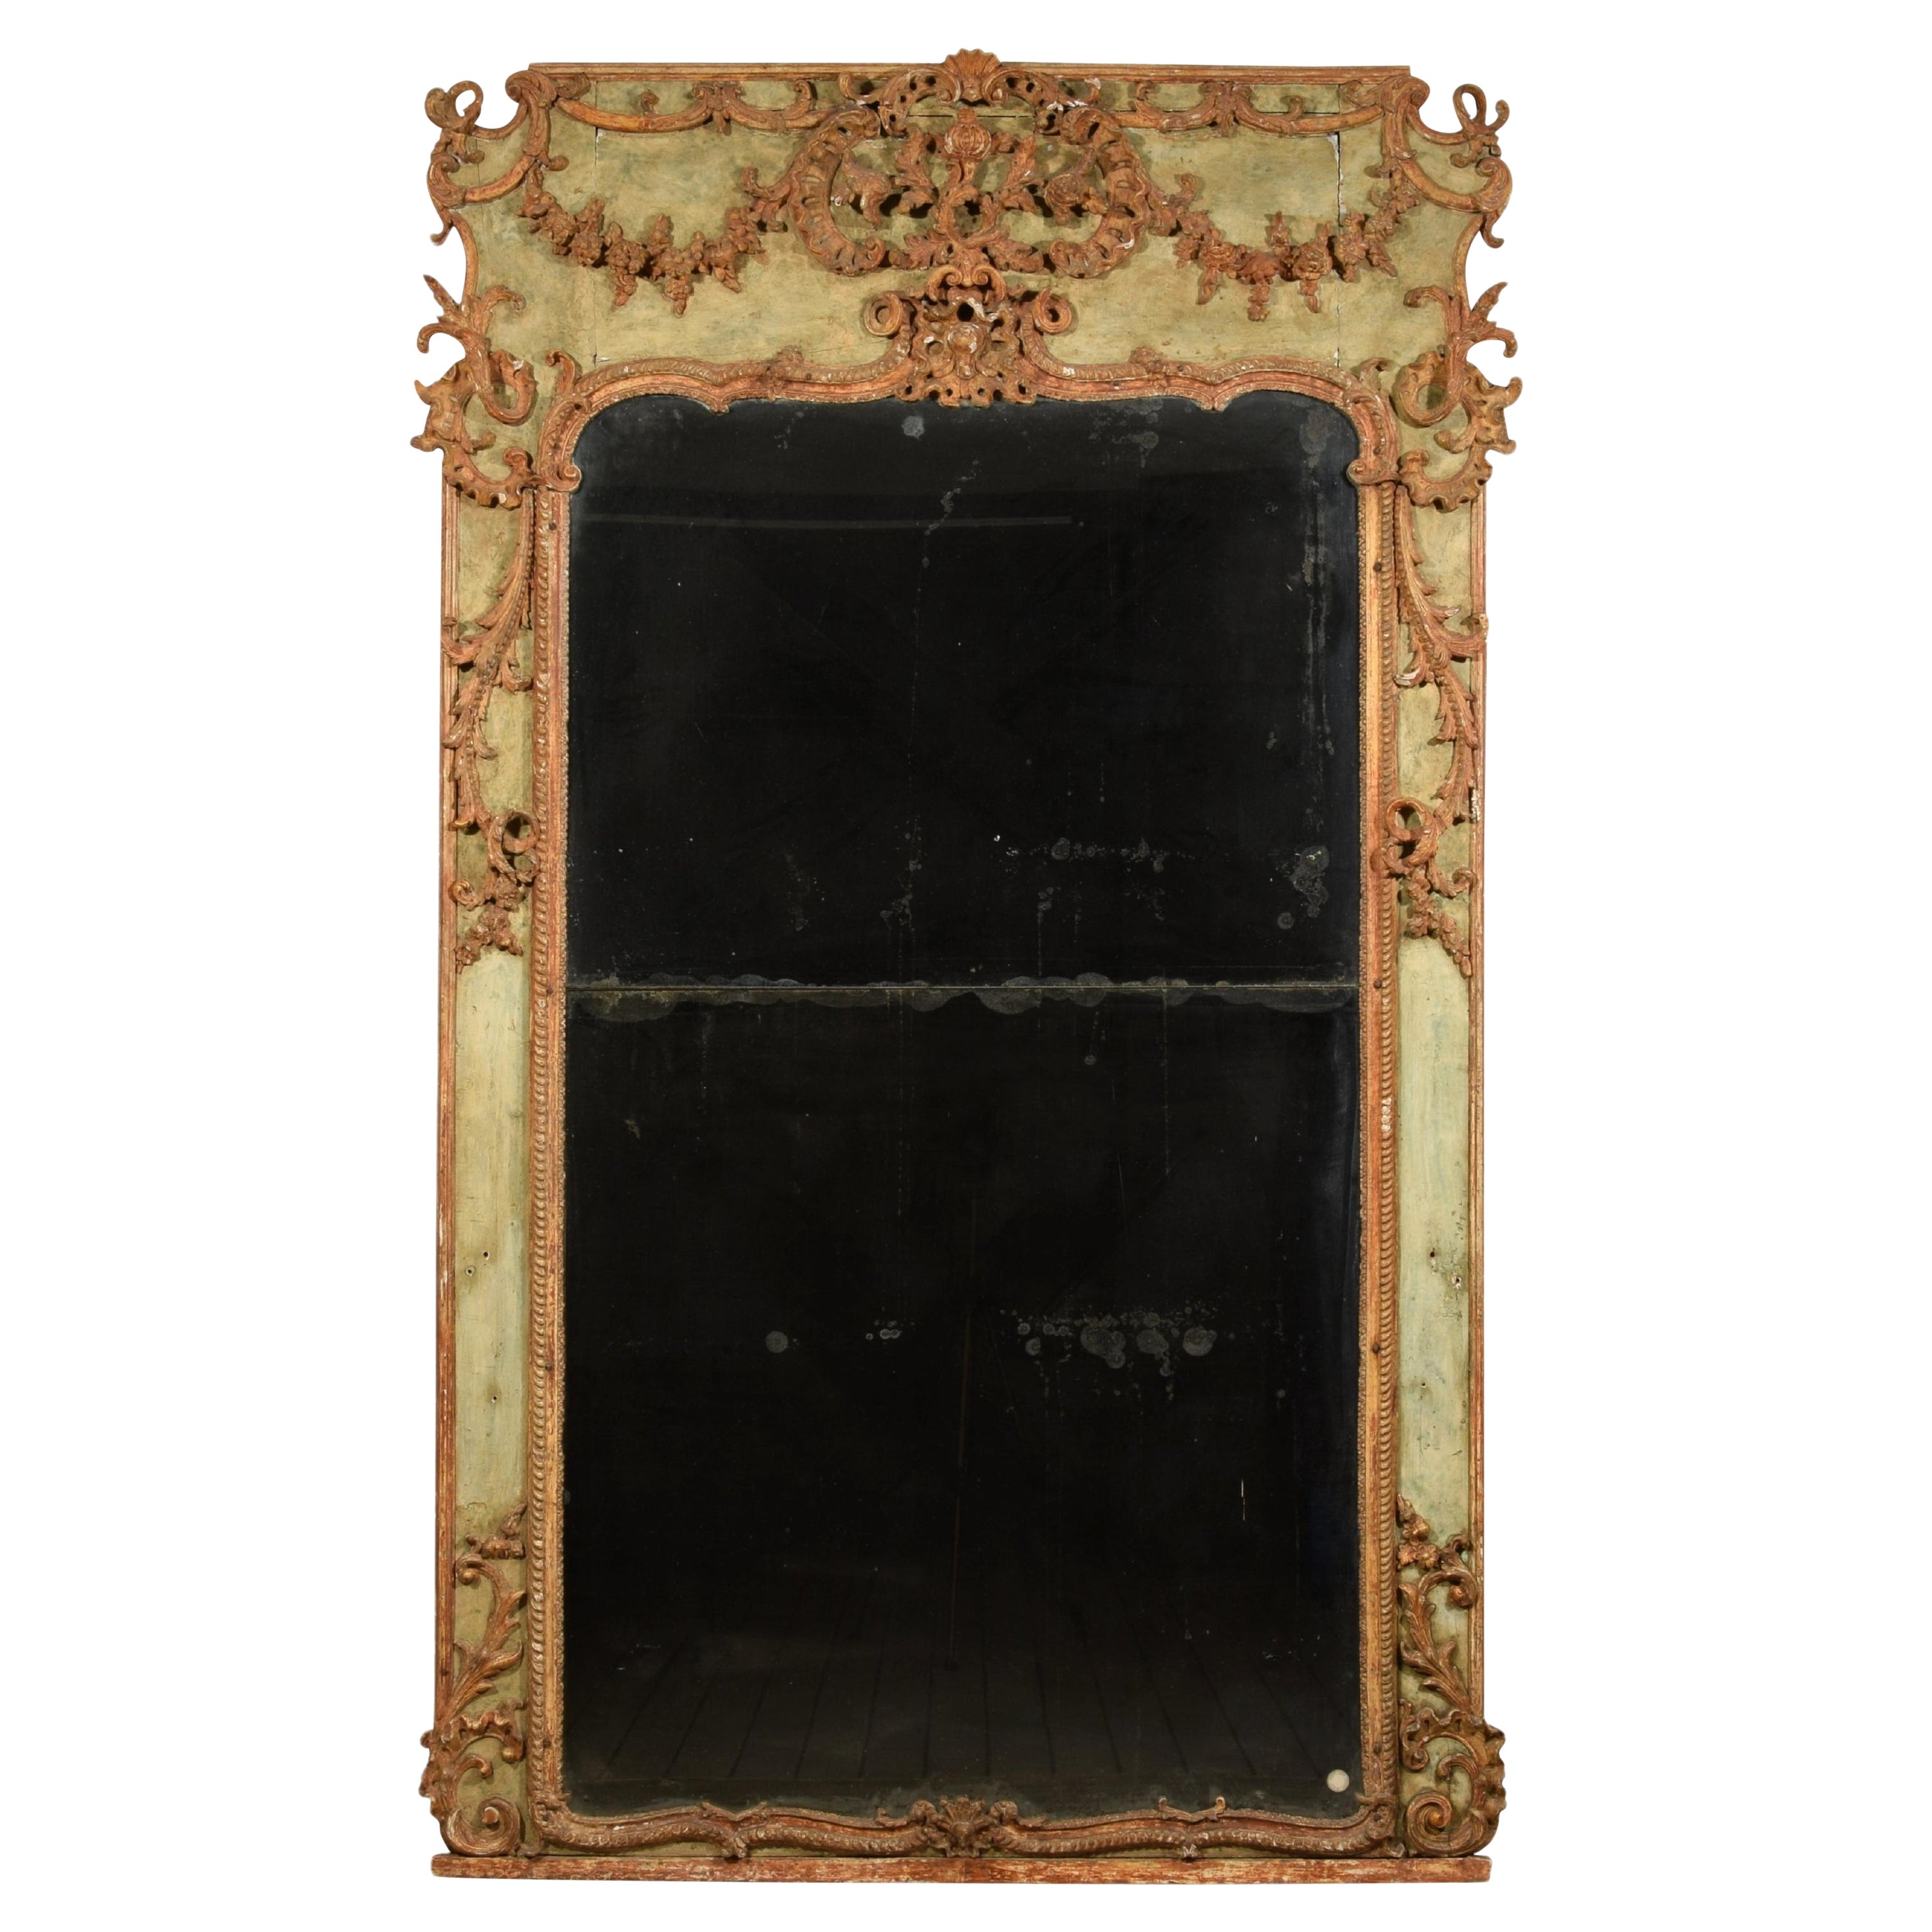 18th Century, Large Italian Baroque Wood and Plaster Lacquered Mirror